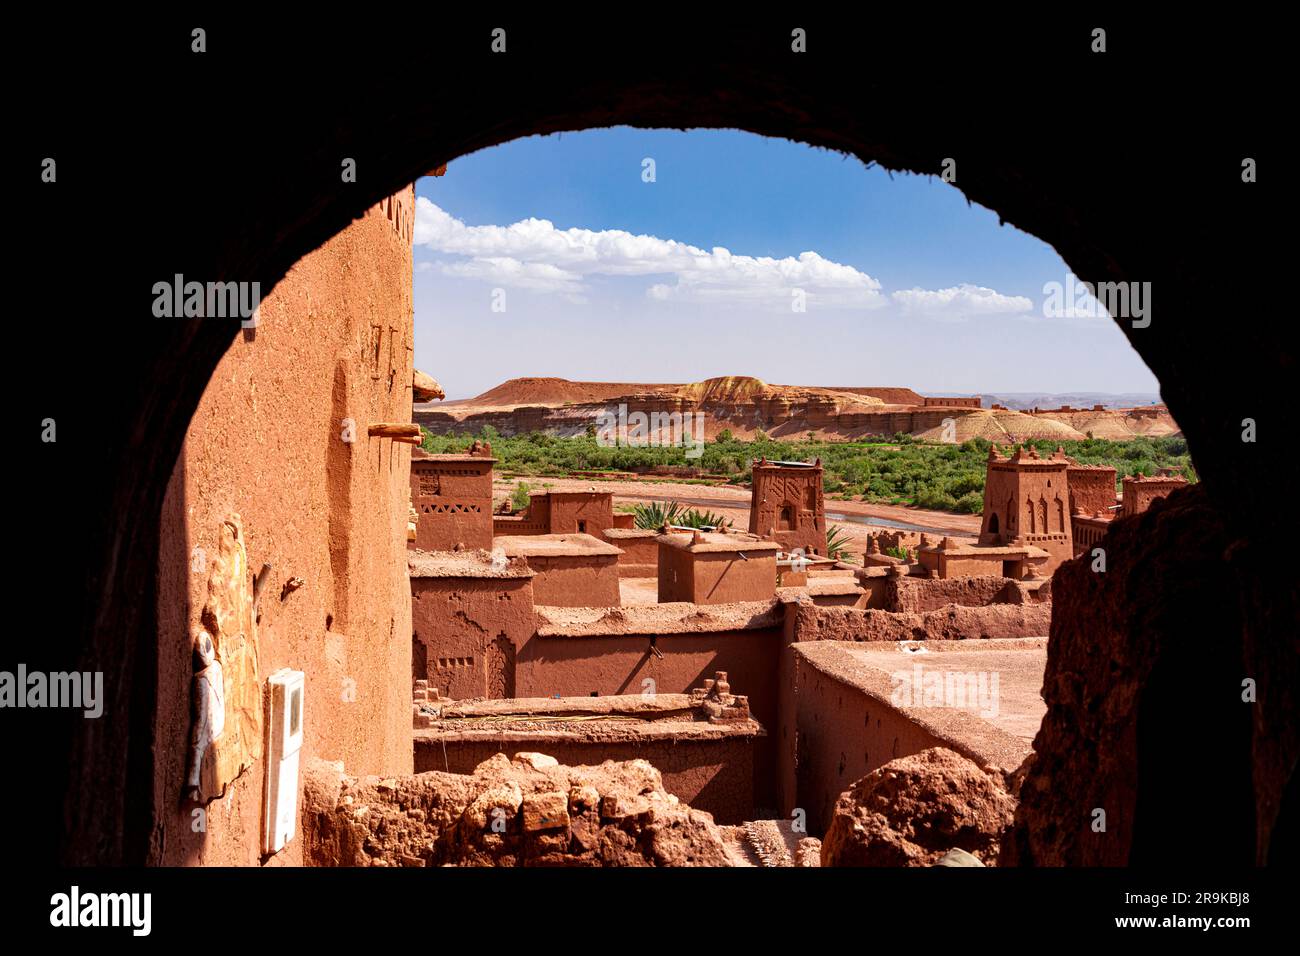 Ancient fortress or Kasbah or Ksar of Ait Ben Haddou  built with mudbricks, Ouarzazate province, Morocco Stock Photo